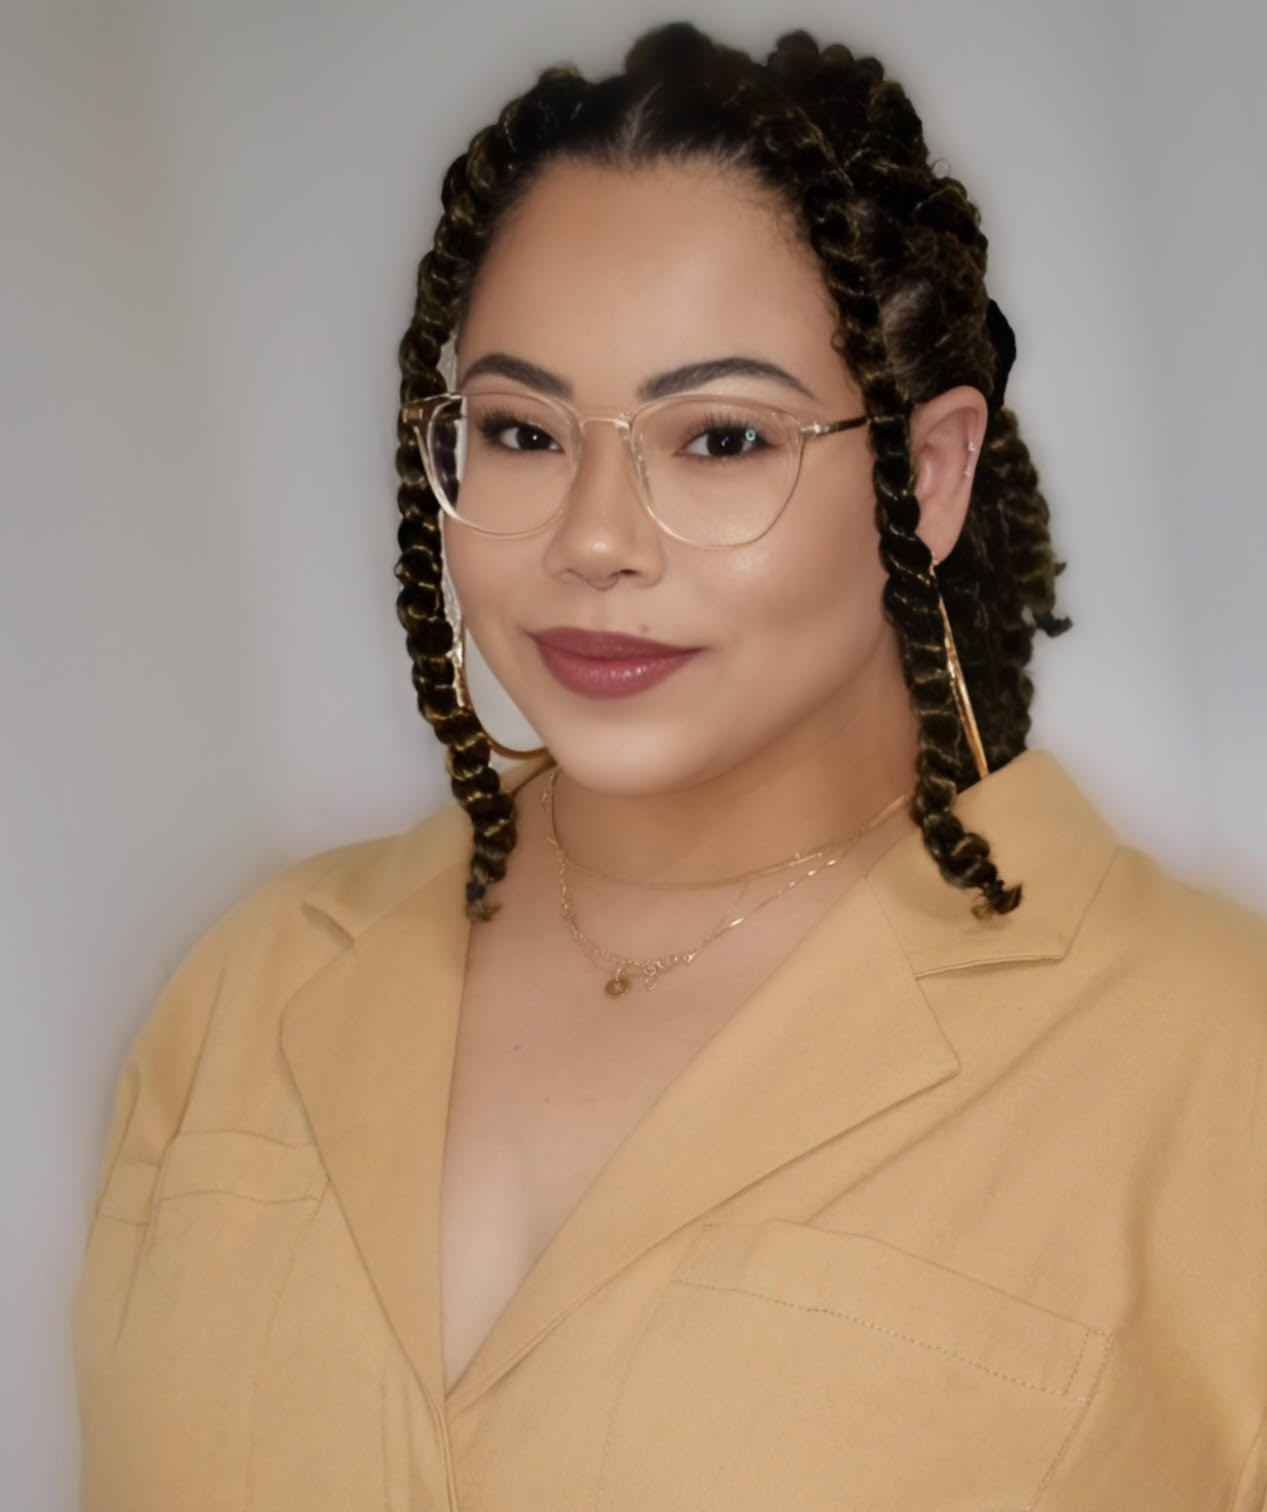 A photo of a woman with light skin and dark hair twists in clear-framed glasses, a beige collared top and gold necklaces